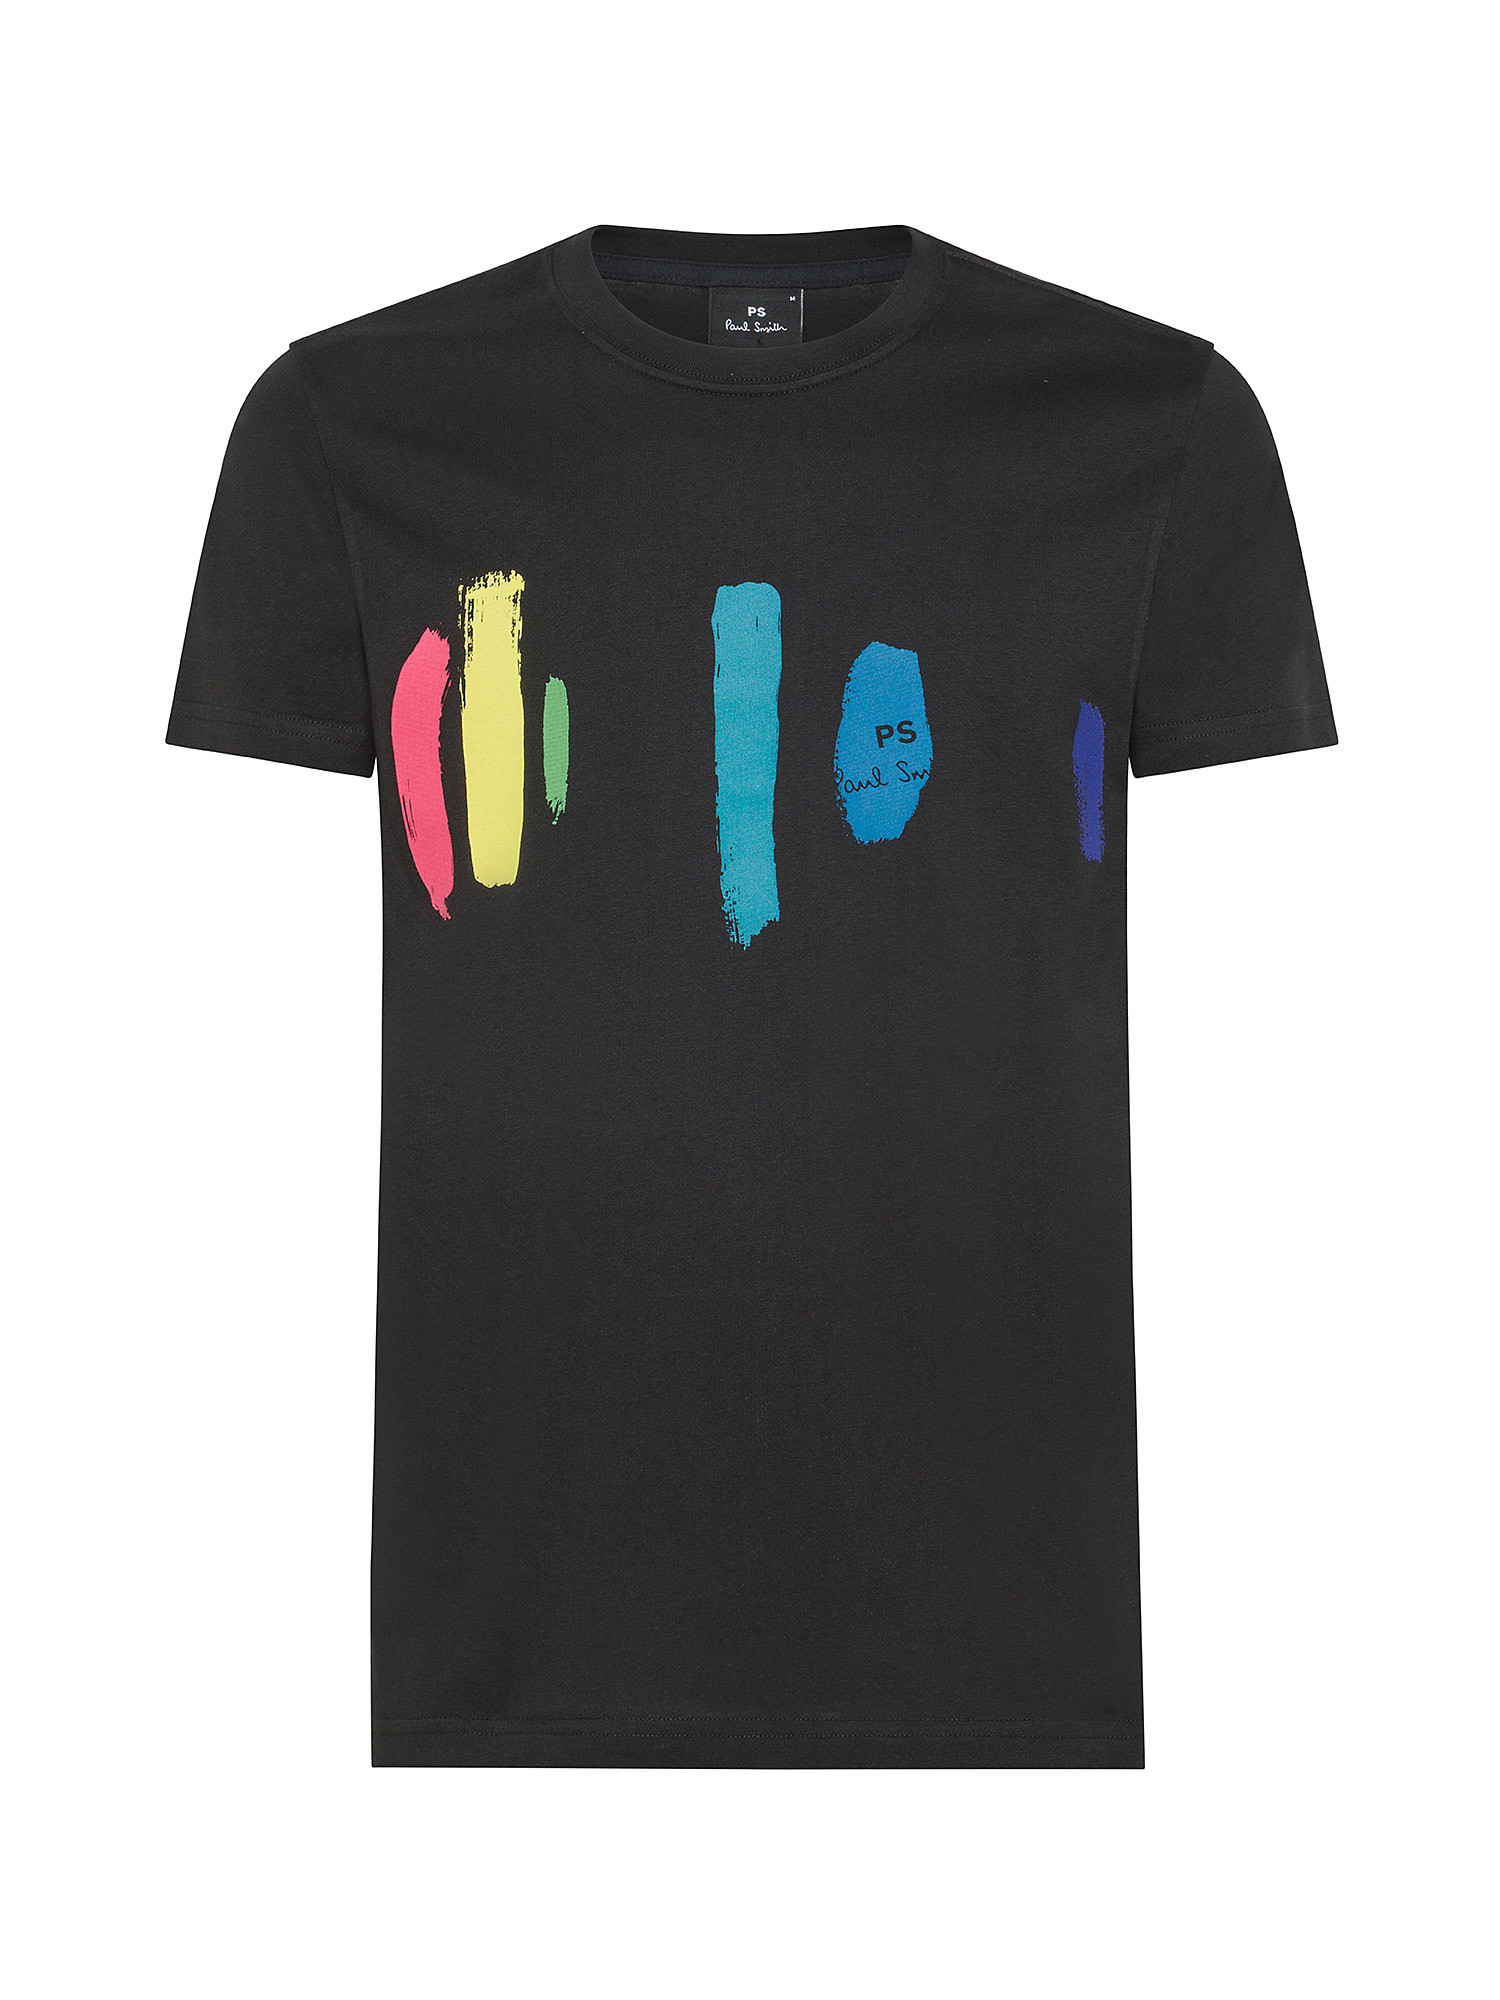 Paul Smith - T-shirt in cotone slim fit con stampa pennellate, Nero, large image number 0